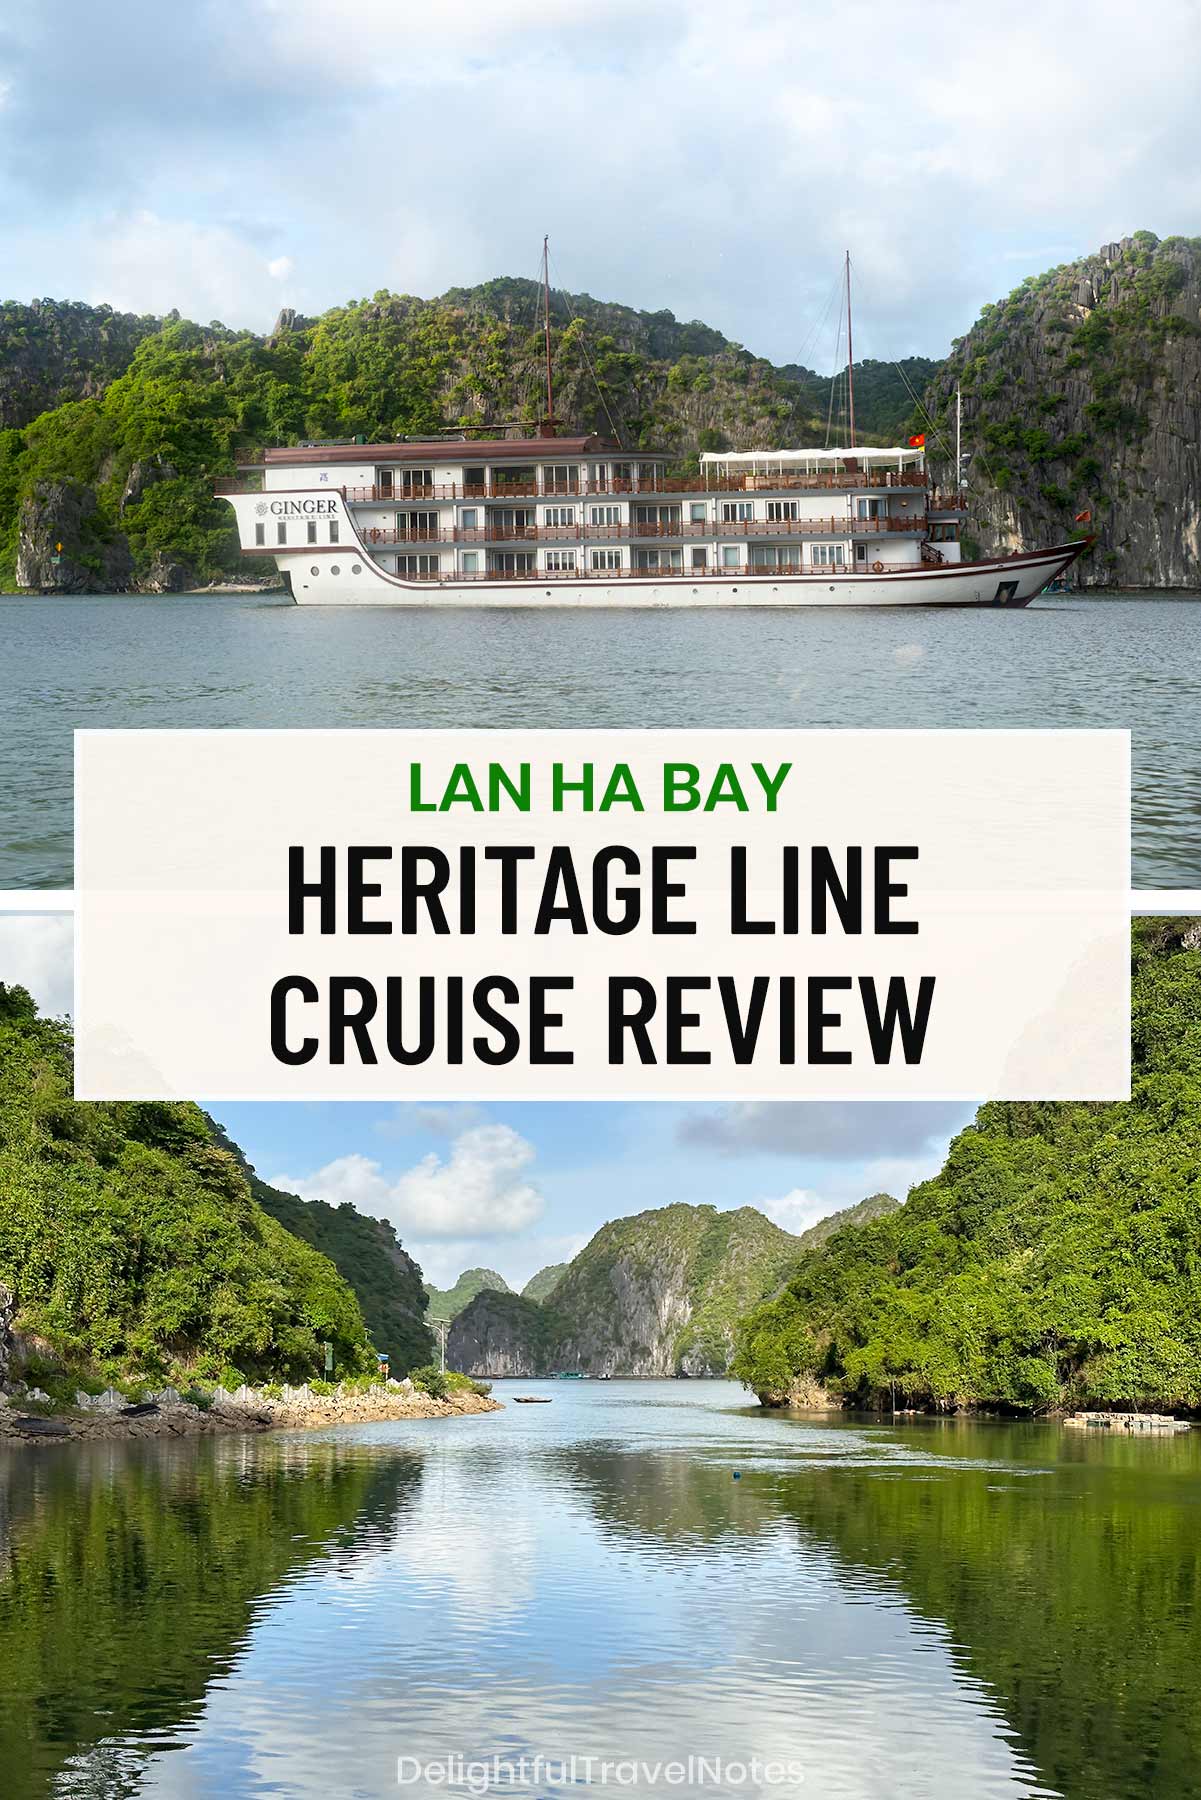 a collage of scenery captured from a Lan Ha Bay cruise on Heritage Line's Ginger ship.